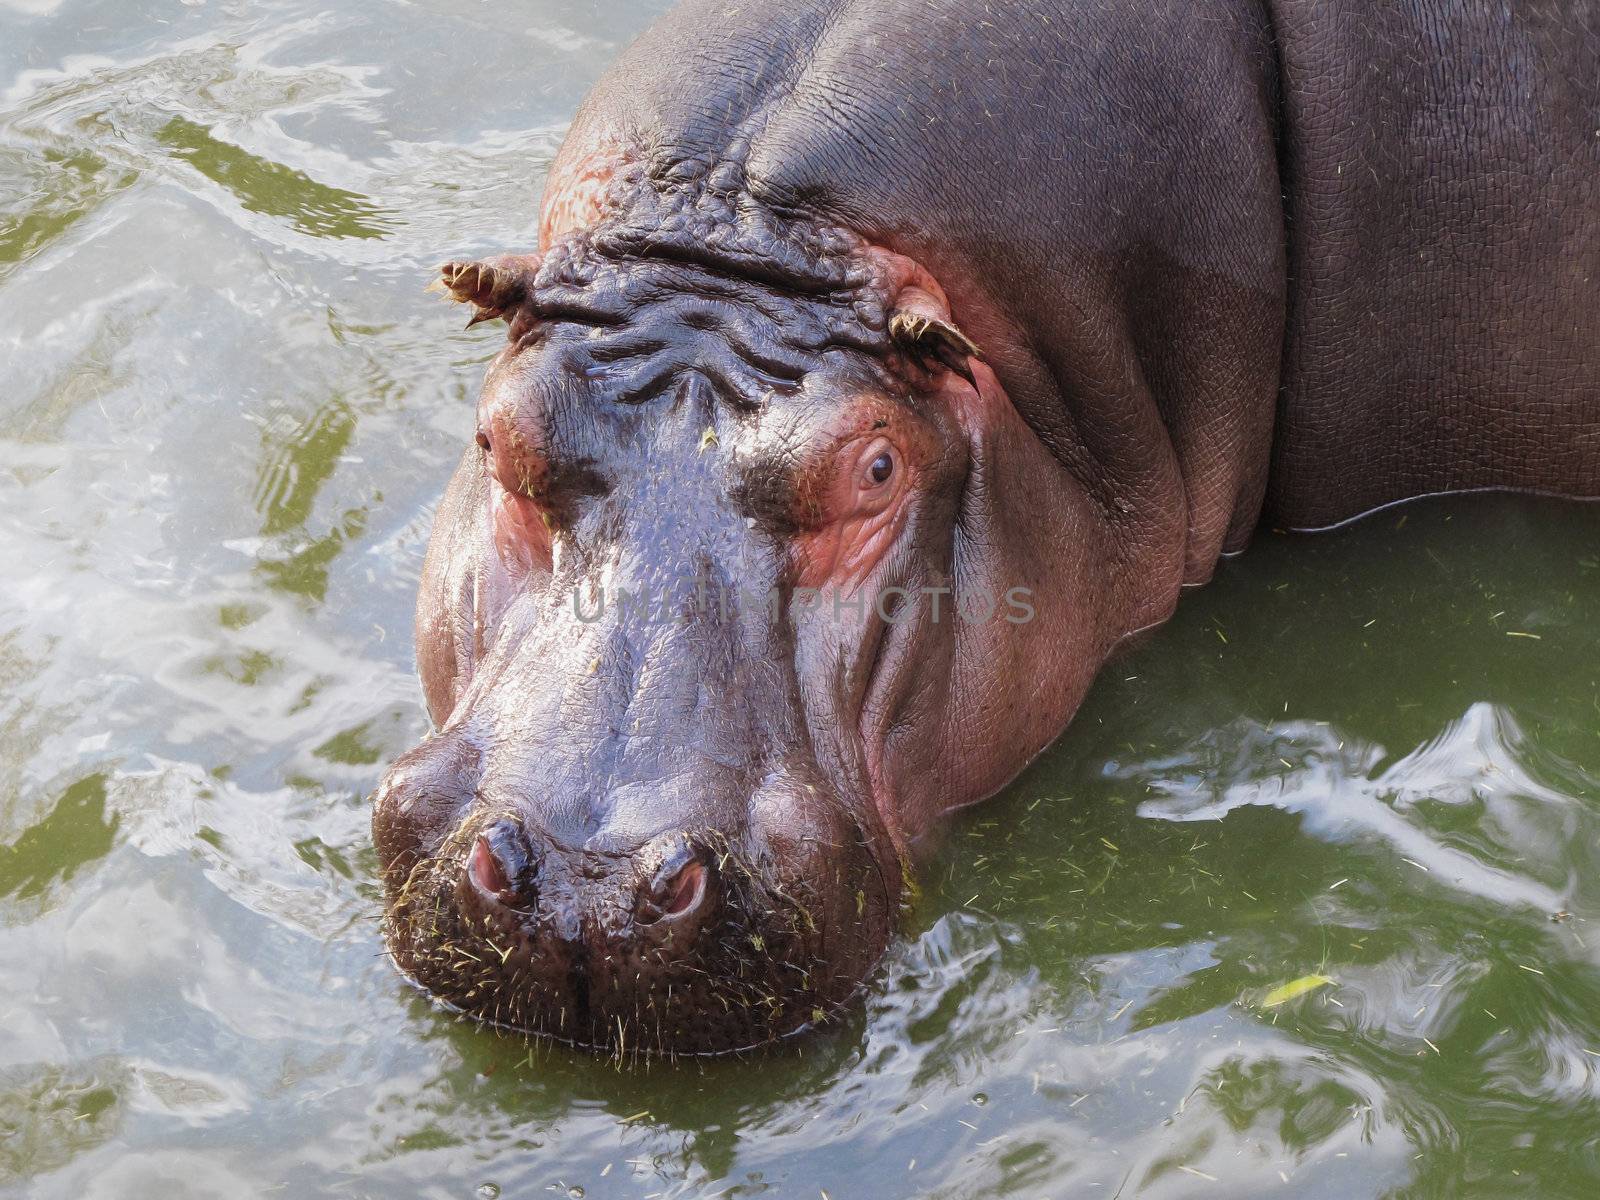 Portrait of a Hippopotamus seen from above and standing in water